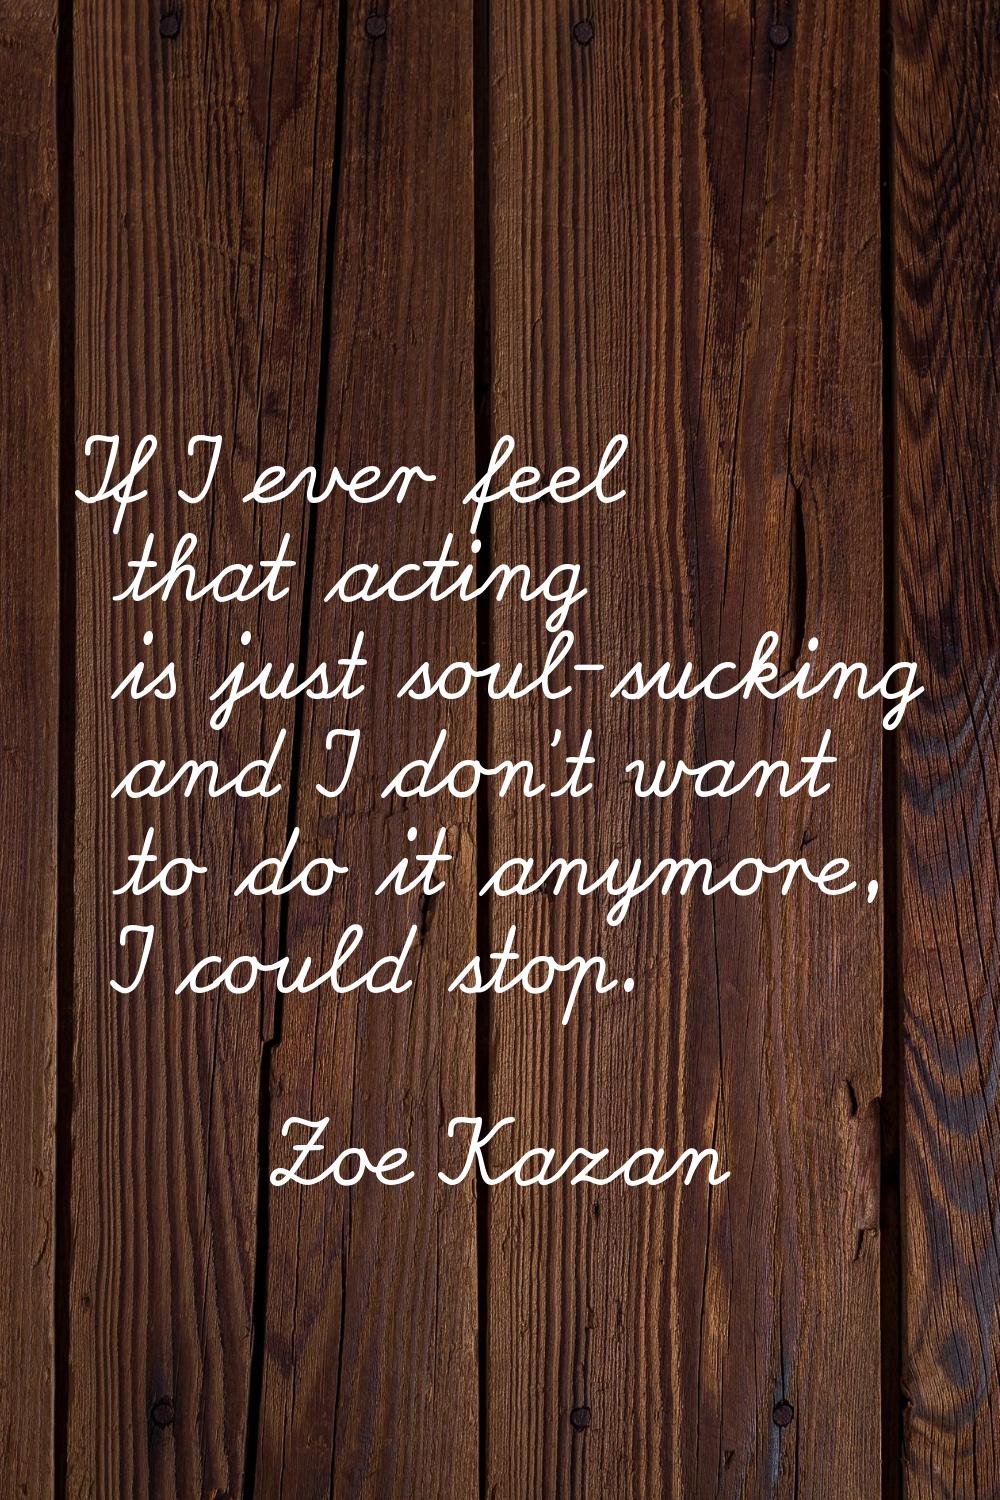 If I ever feel that acting is just soul-sucking and I don't want to do it anymore, I could stop.